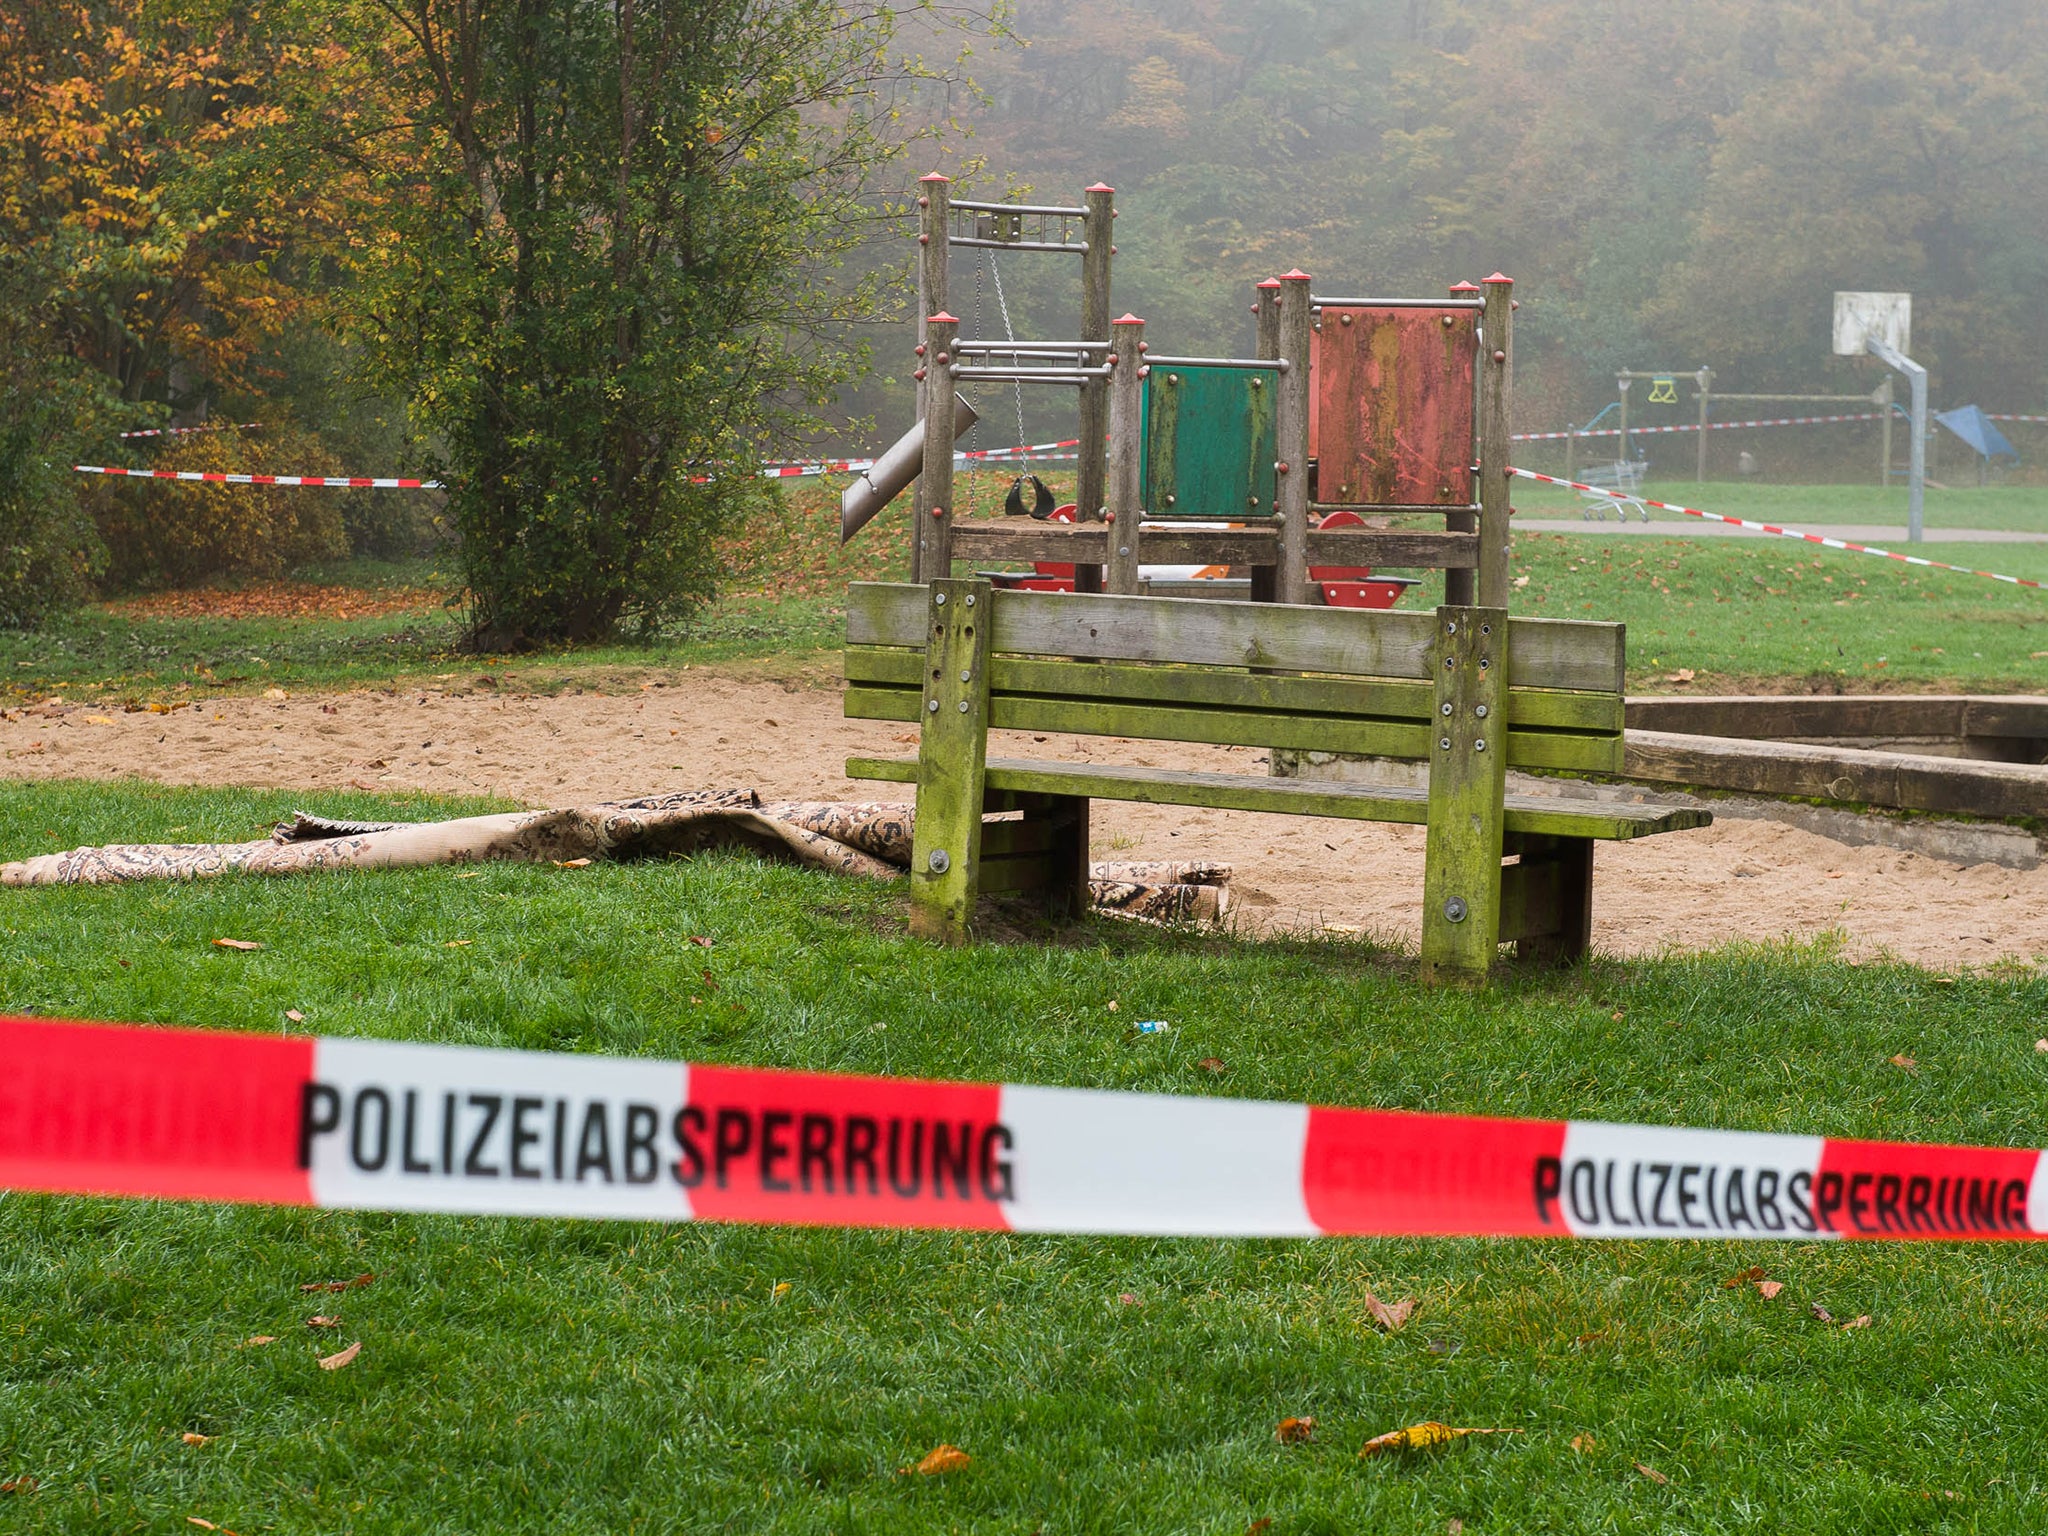 Police tape cordons off the playground bench where the woman burst into flames, in Flensburg, Germany